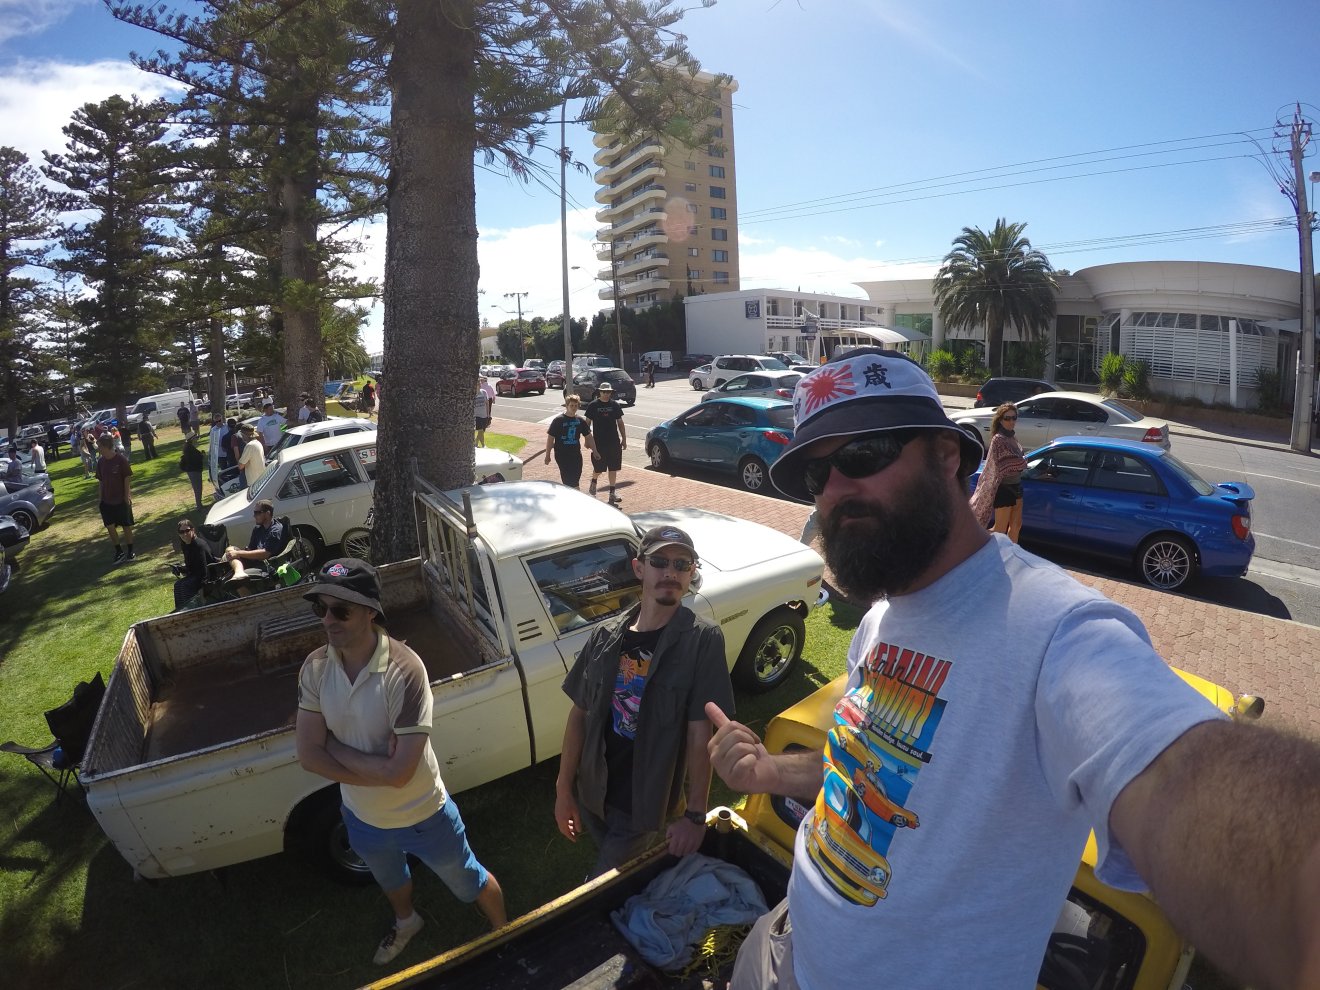 072 - Andrew McIntosh, Ross and Dave - in an Isuzu Wasp - looking at a Chev LUV.JPG